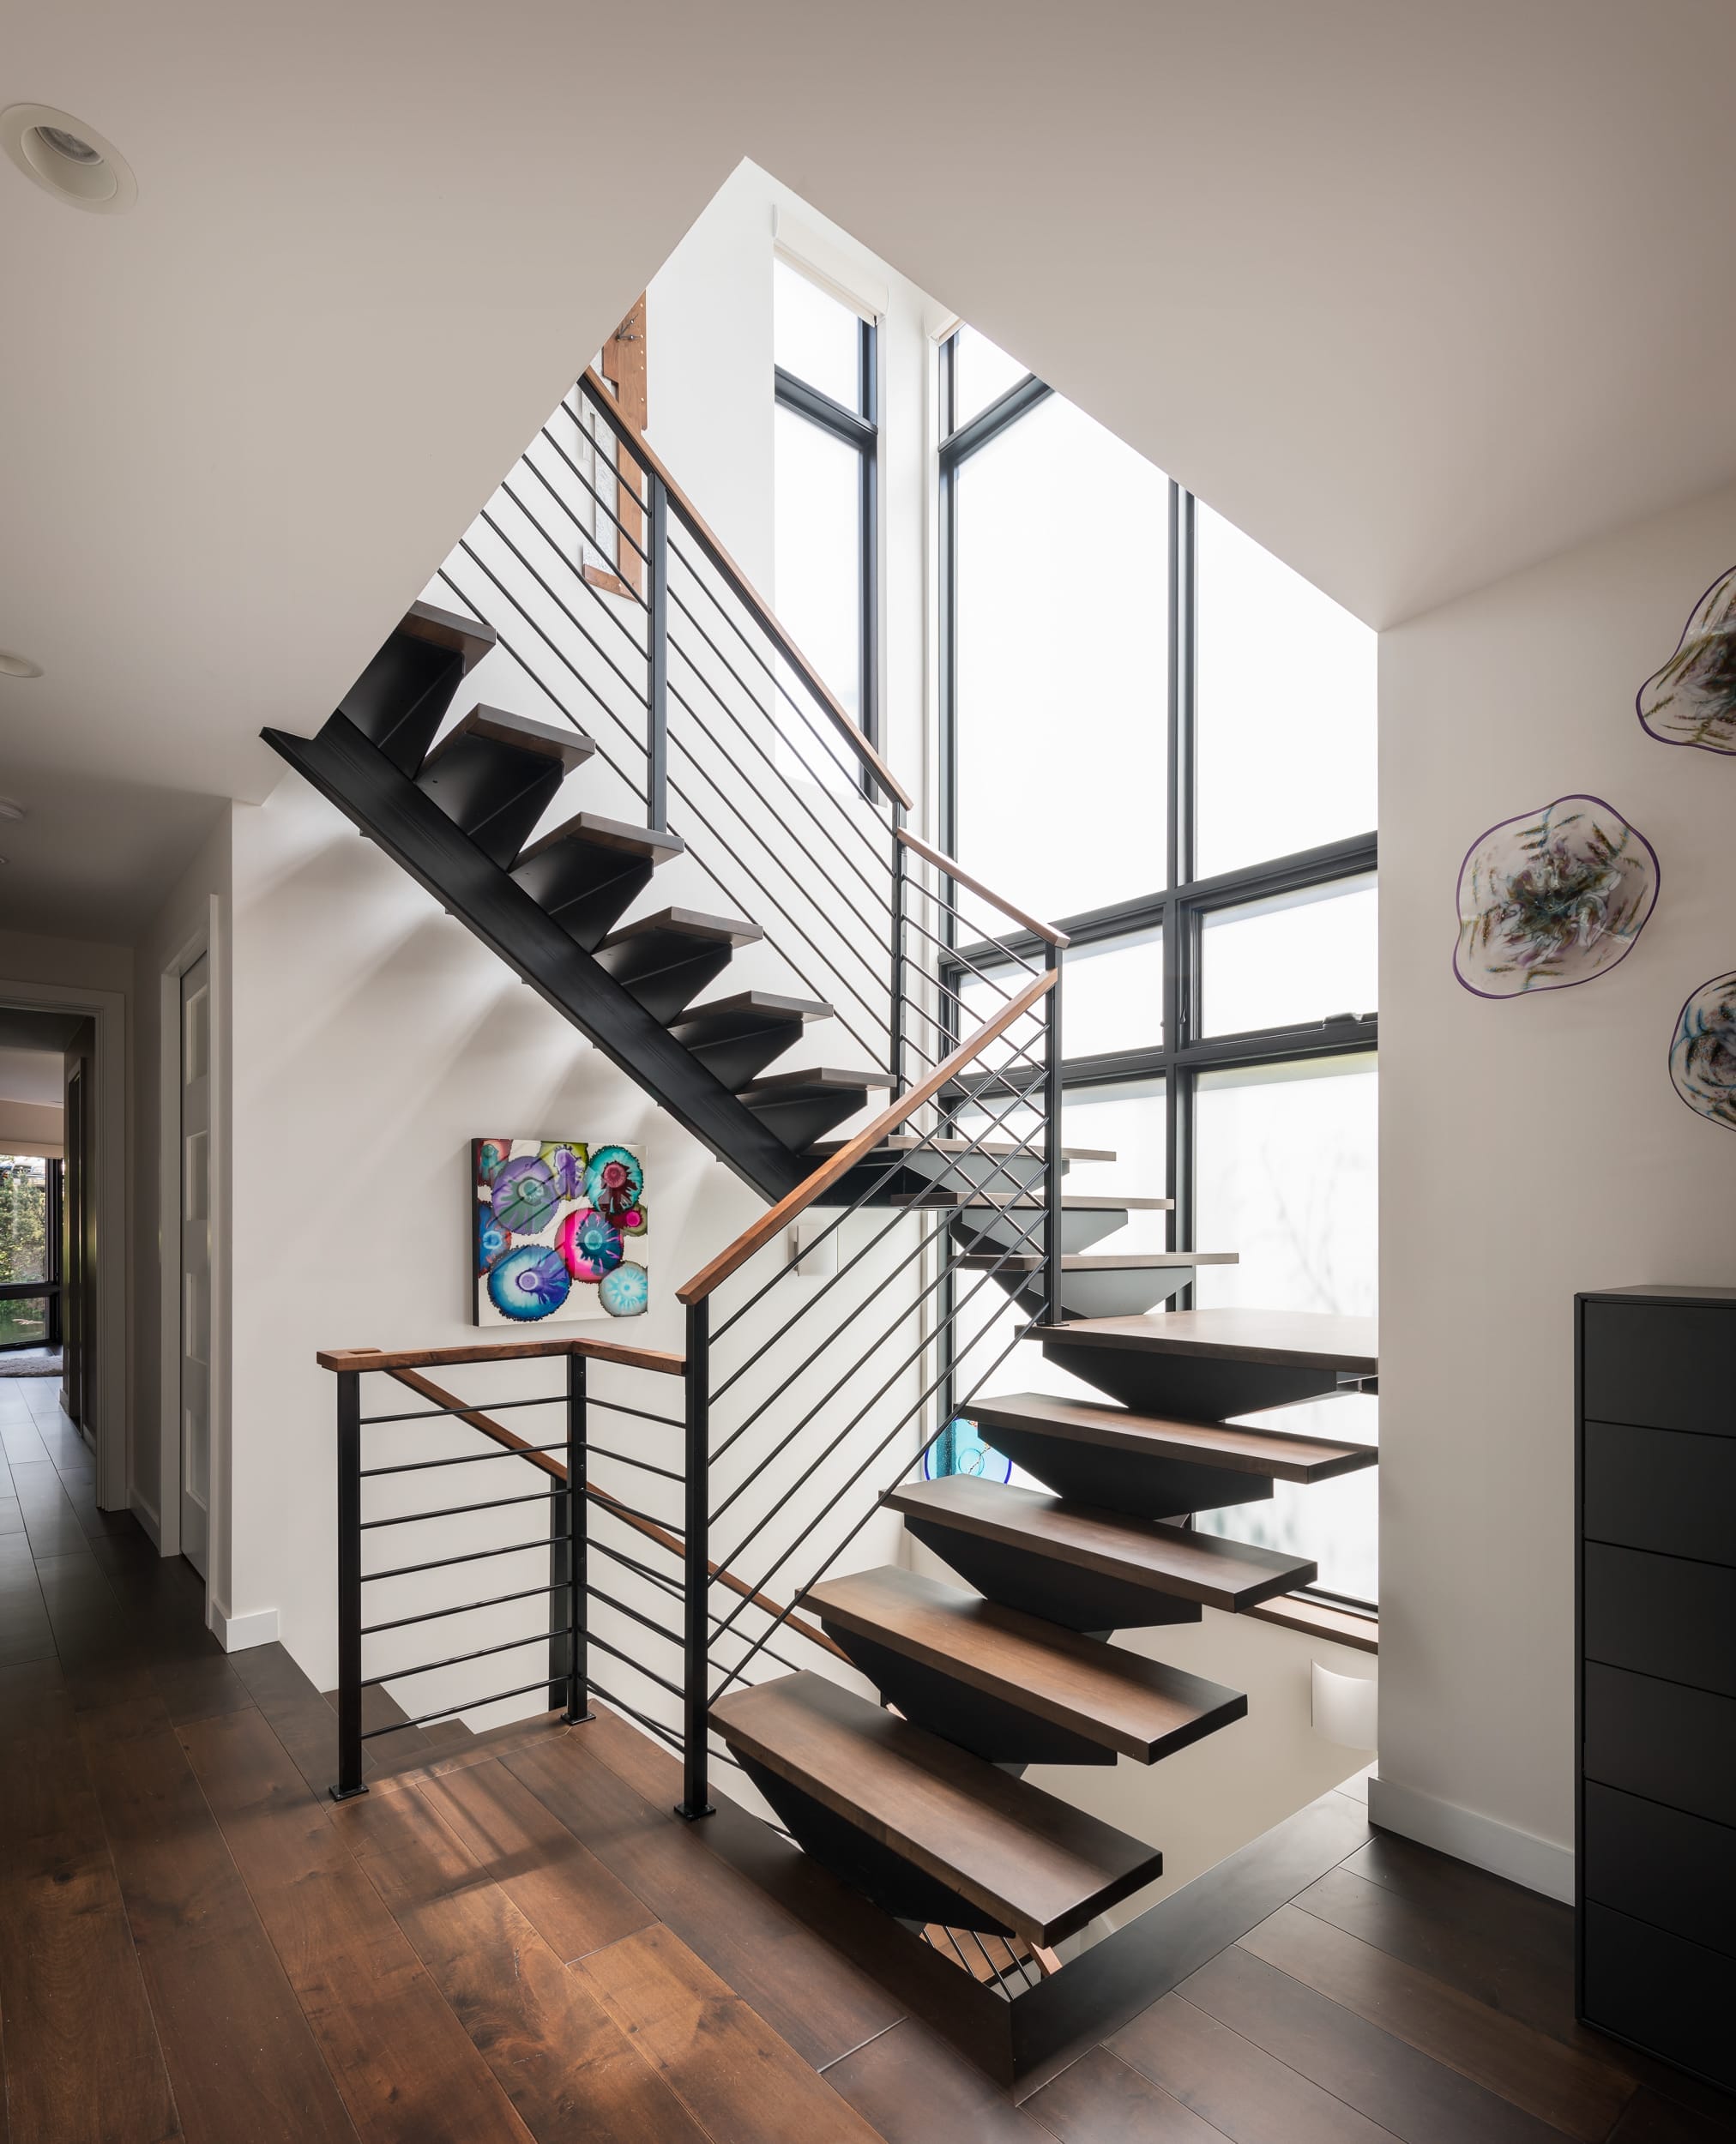 A floating home with a modern staircase designed and built by a skilled carpenter.